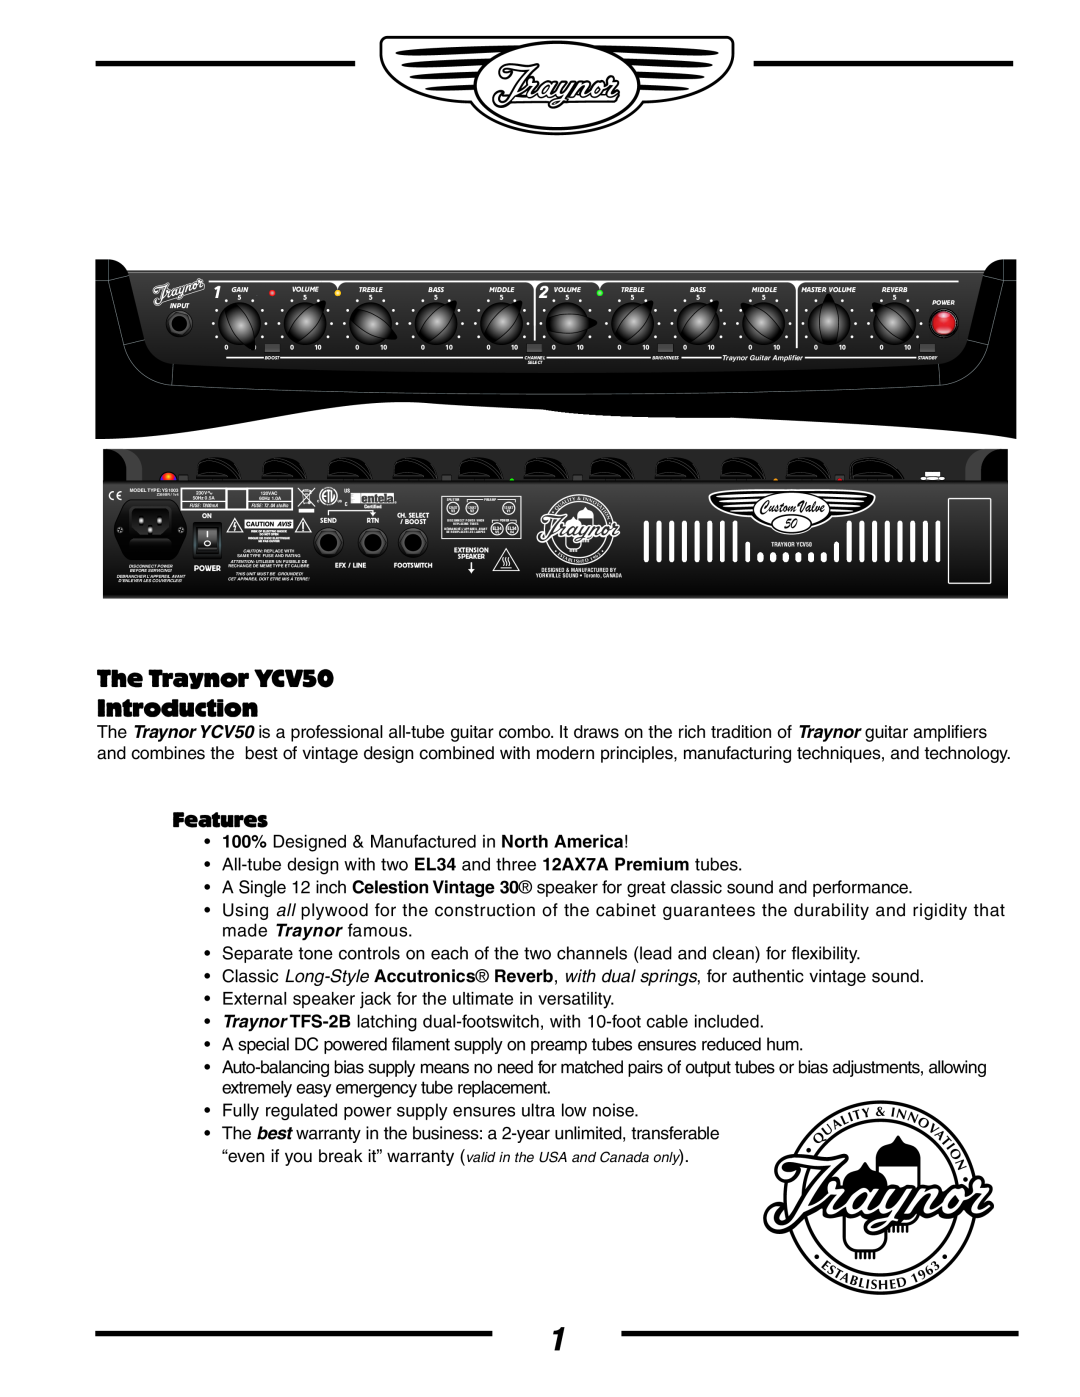 Yorkville Sound YS1003 owner manual The Traynor YCV50 Introduction, Features, Custom Valve 